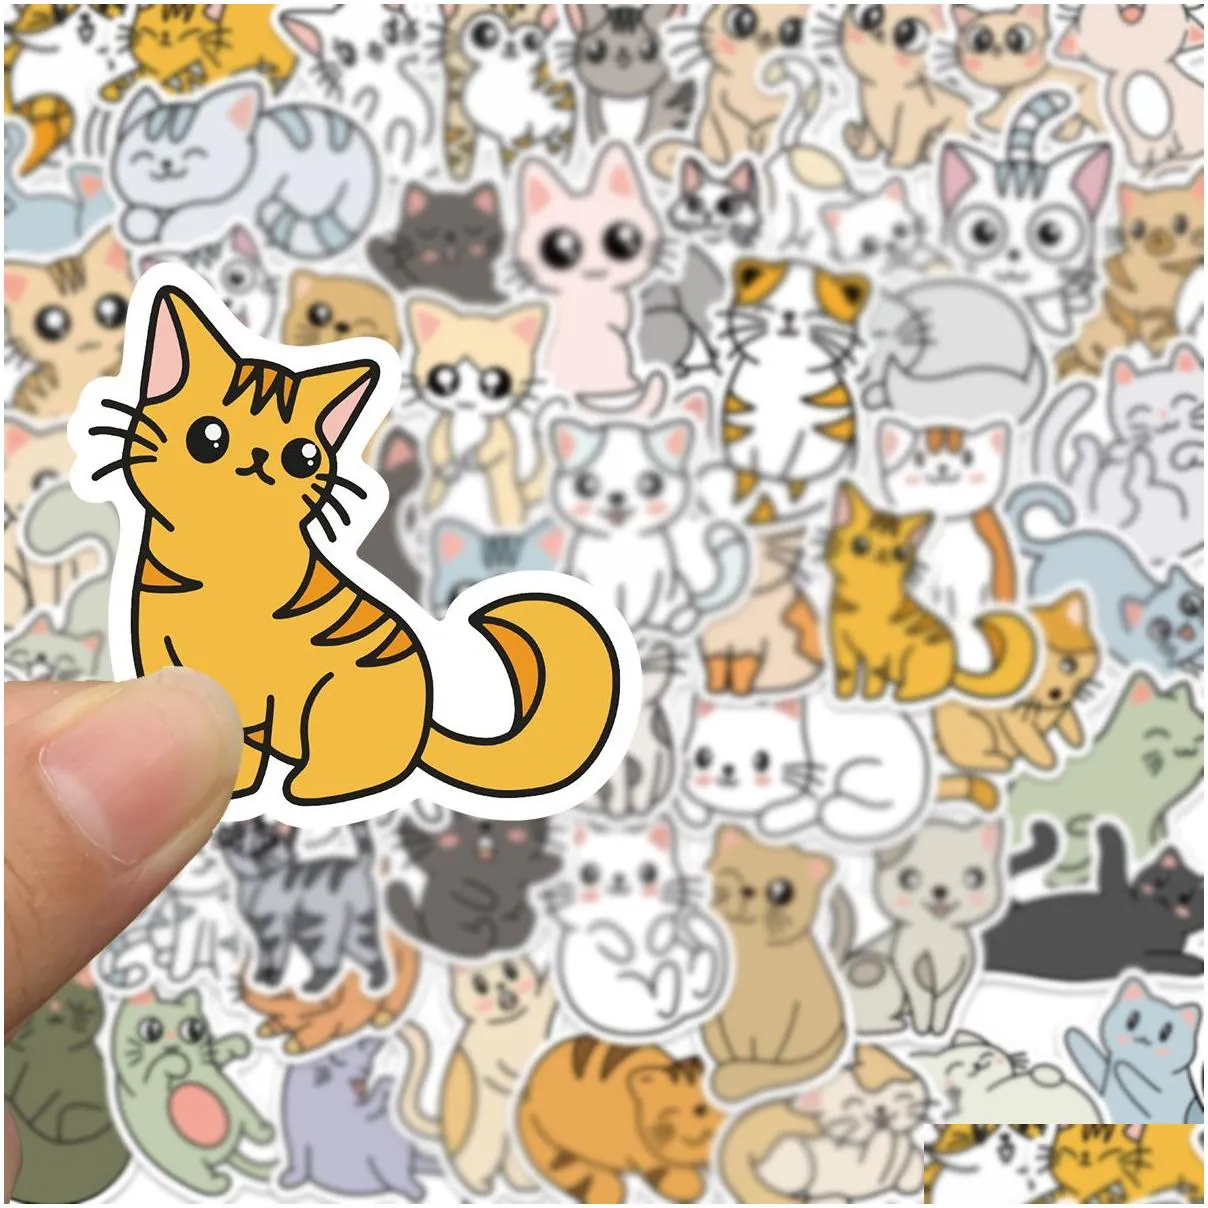 Pack of 60Pcs Wholesale Cartoon Cute Cat Stickers Waterproof Sticker For Luggage Laptop Skateboard Notebook Water Bottle Car decals Kids Gifts